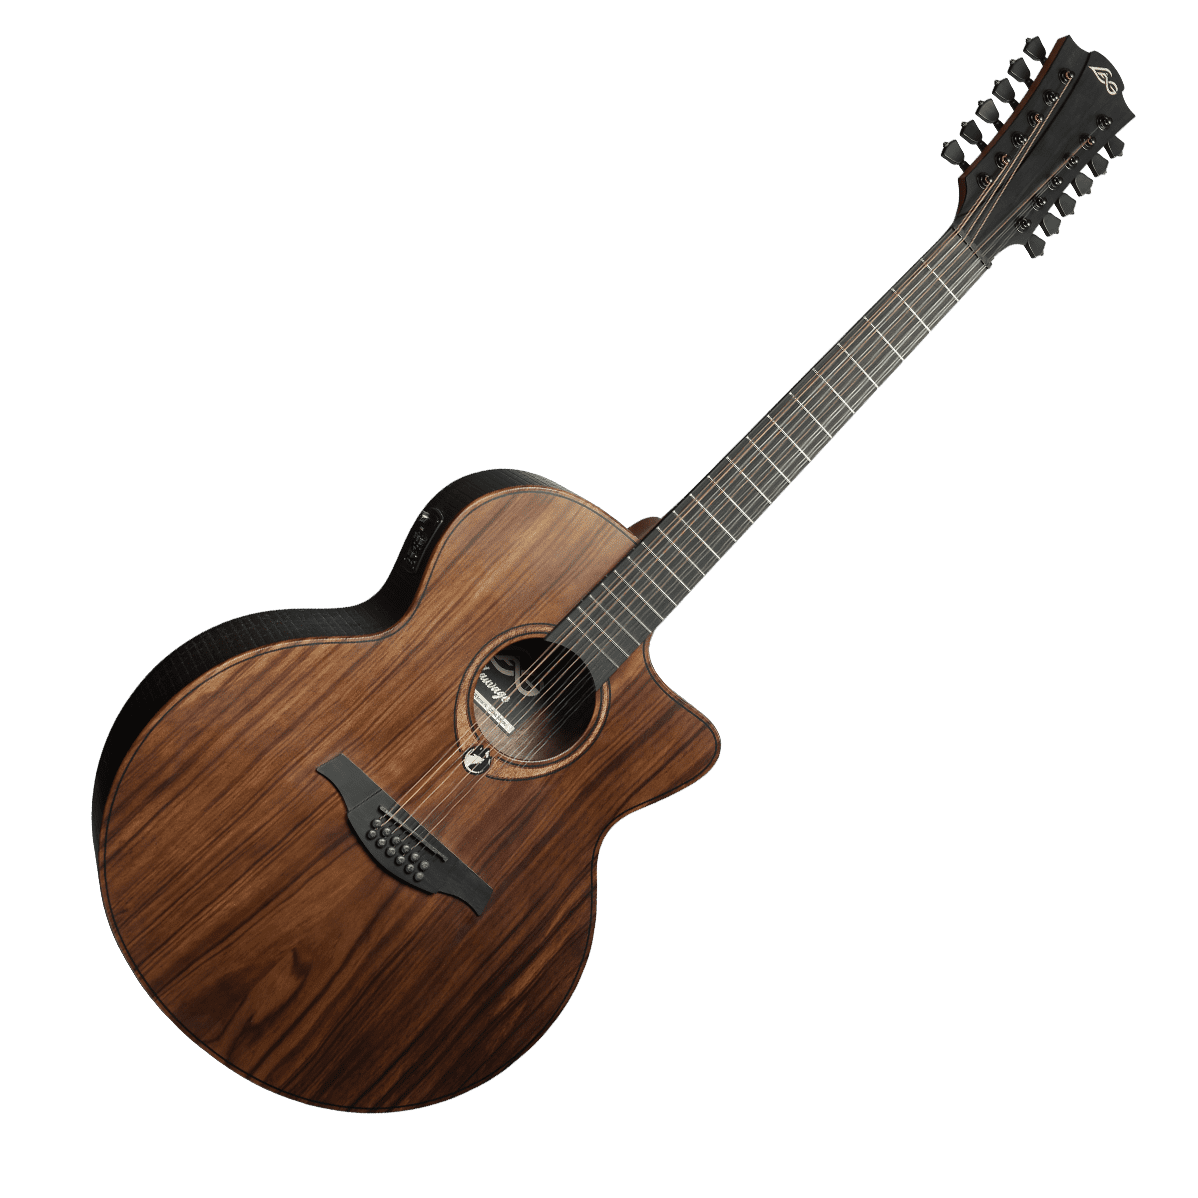 LAG Sauvage Jumbo 12 Strings Cutaway Acoustic-Electric, Electro Acoustic Guitar for sale at Richards Guitars.